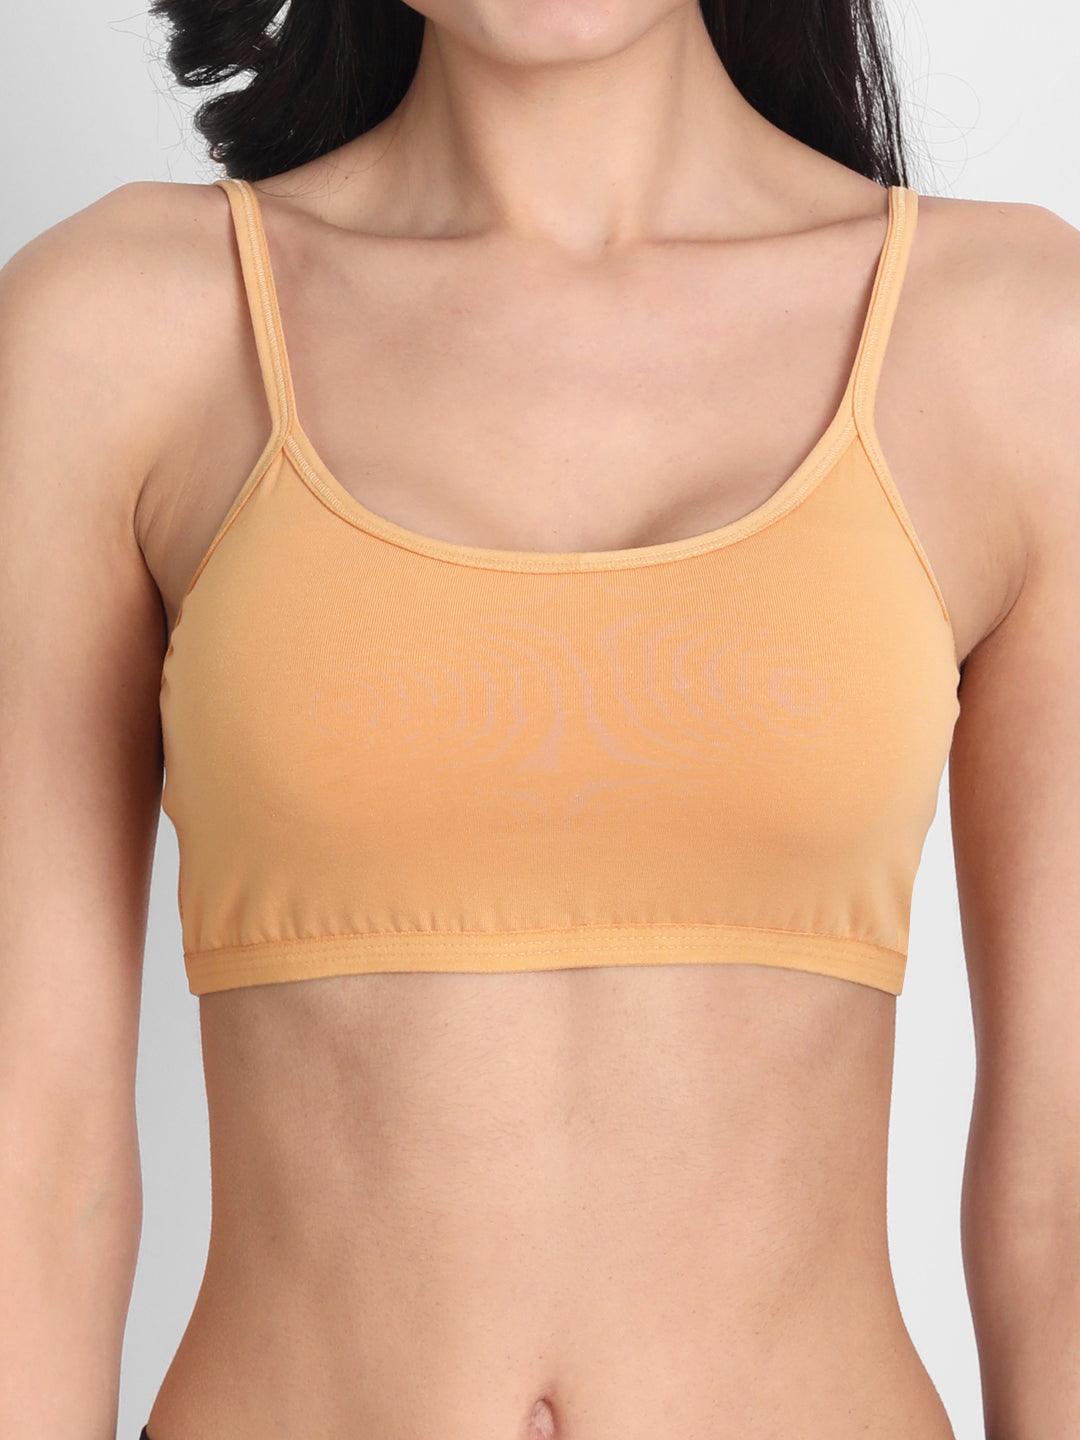 Women's Cotton Non-Padded Non-Wired Full Coverage Seamless Sports Bra